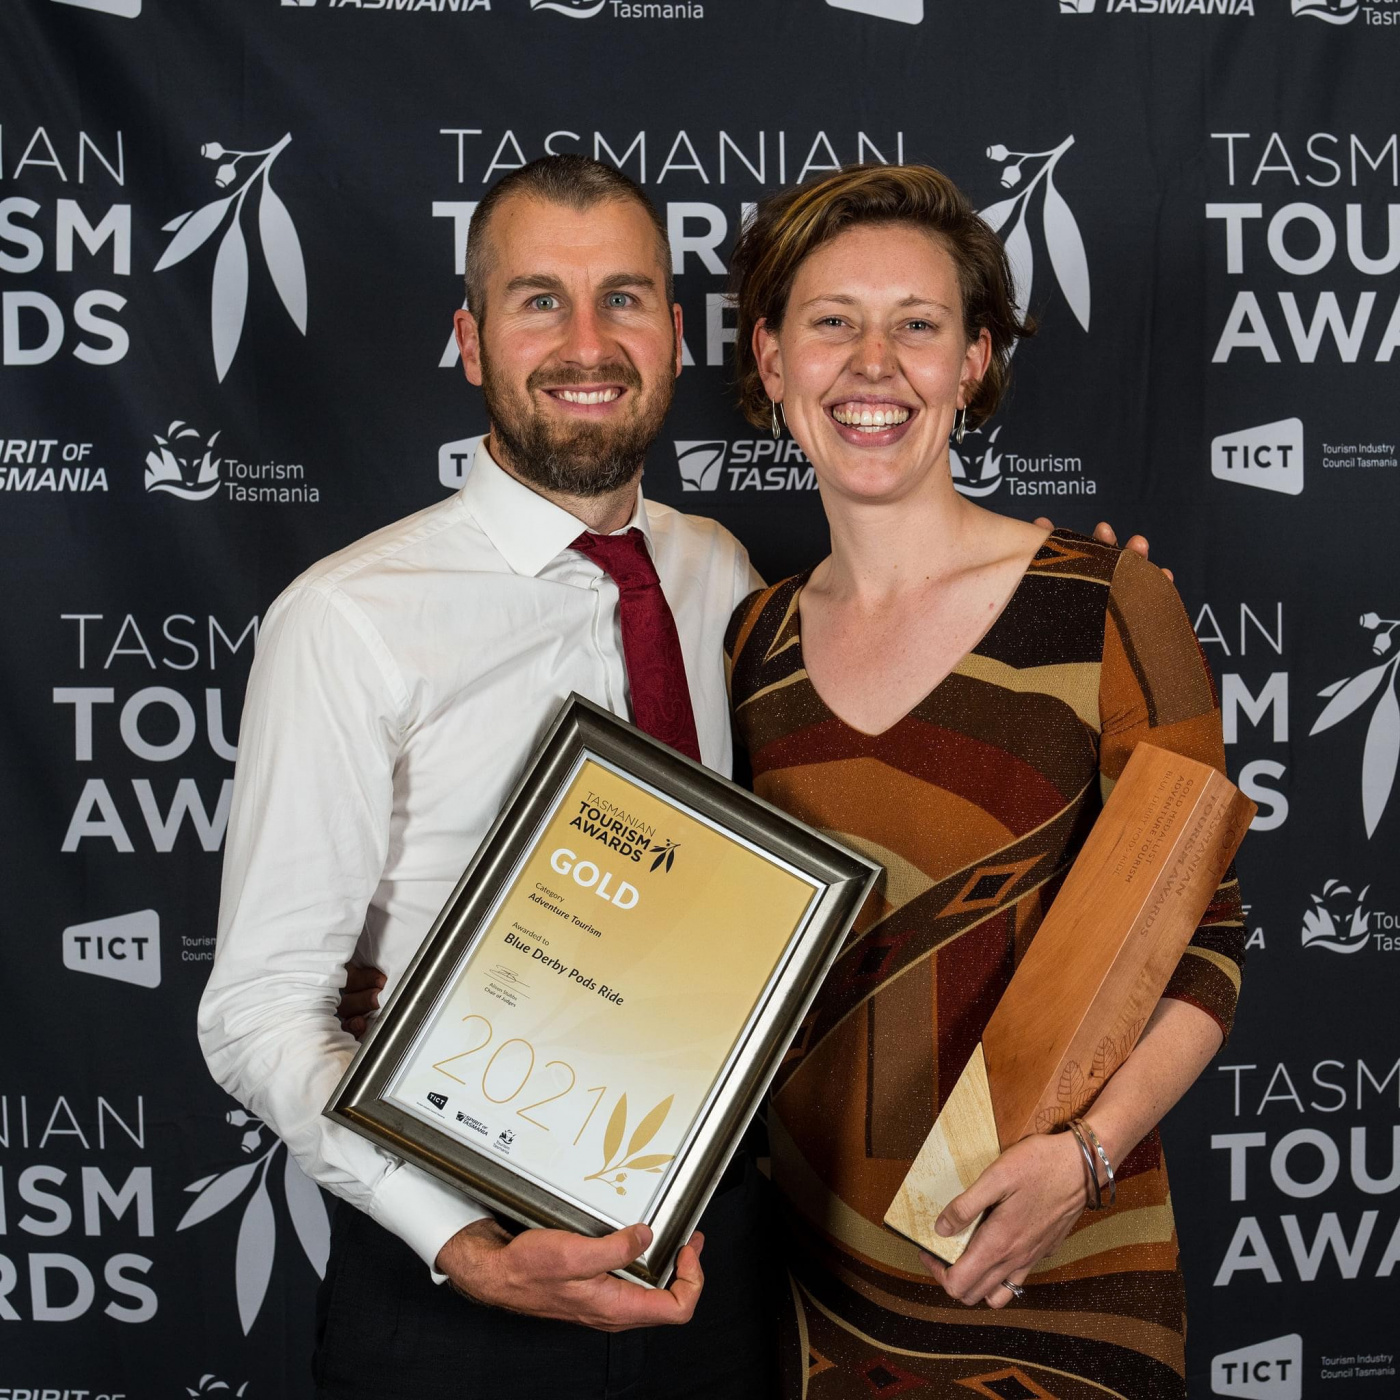 Steve and Tara Howell - Blue Derby Pods Ride Owners at Tasmanian Tourism Awards Evening